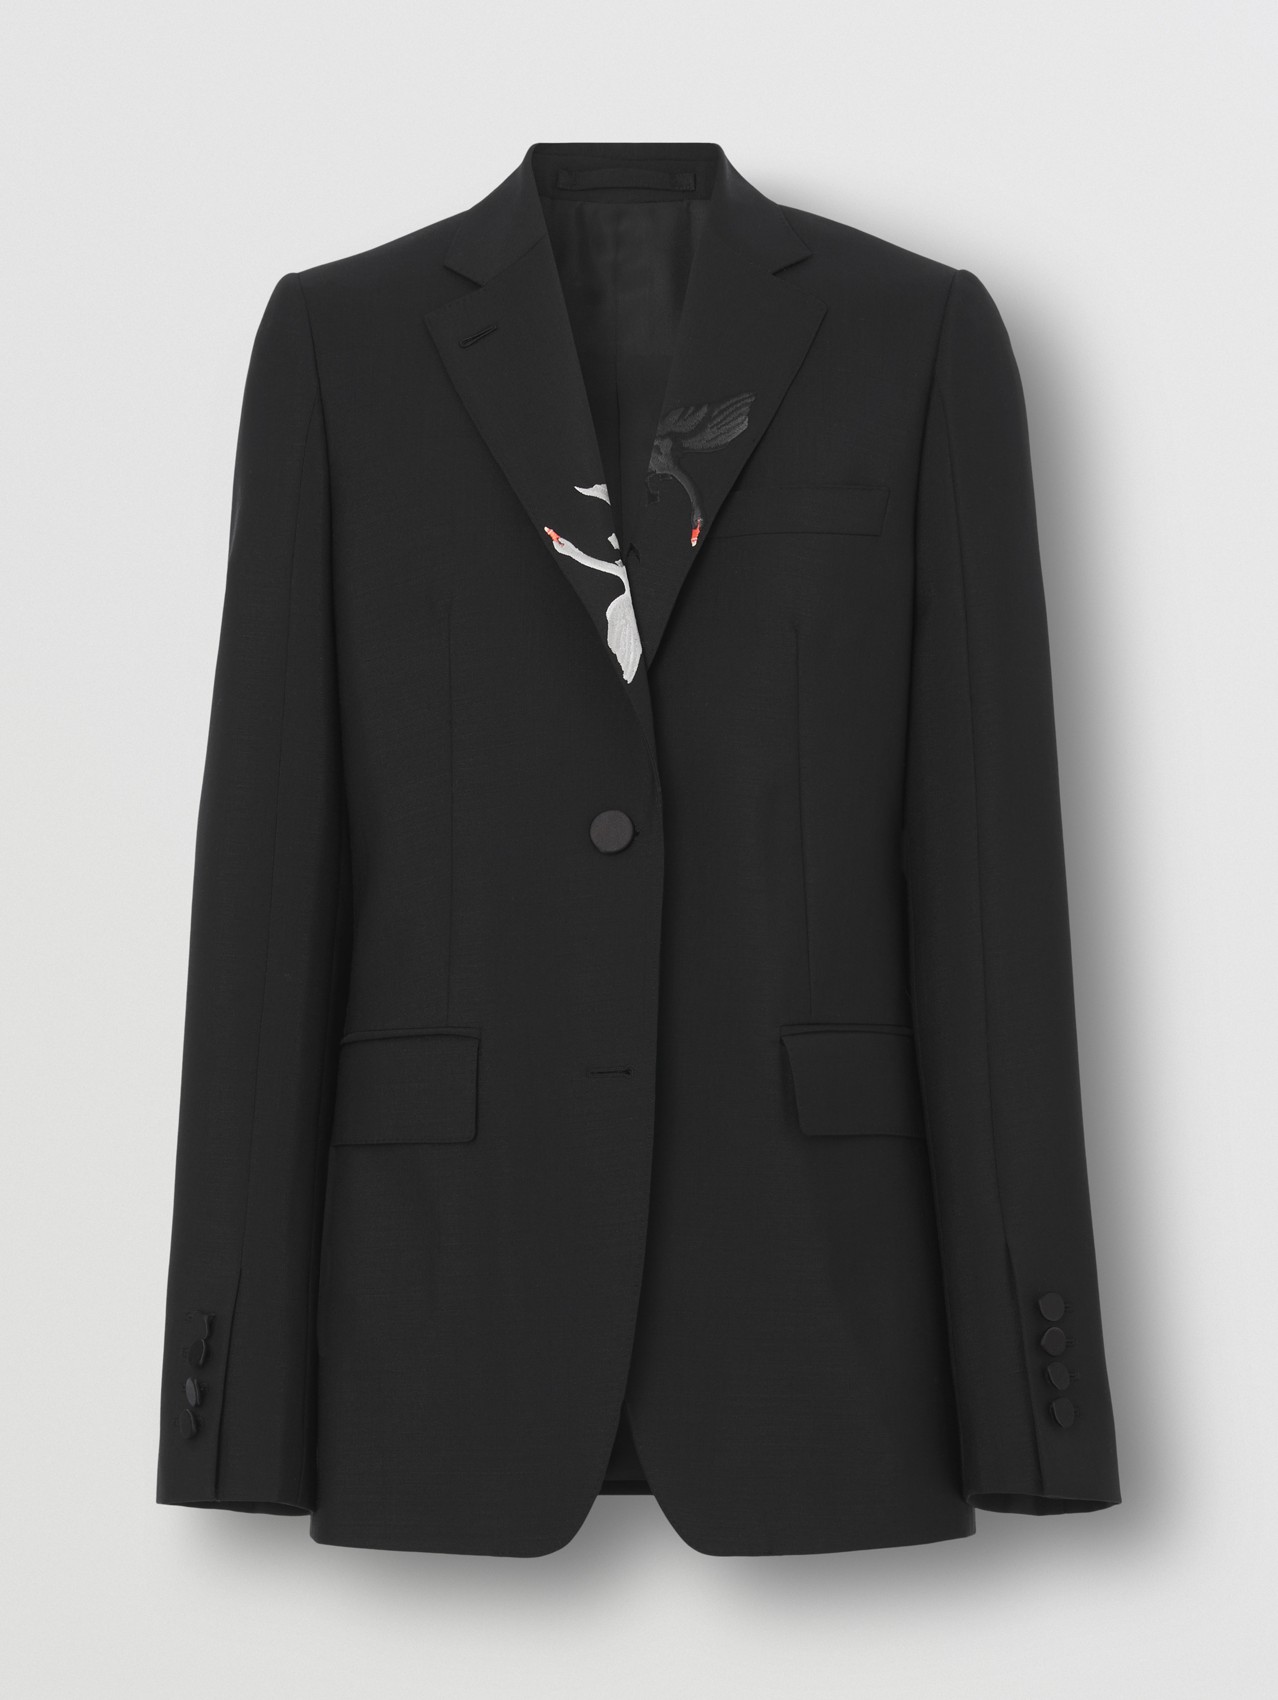 Swan Graphic Mohair Wool Tailored Jacket in Black